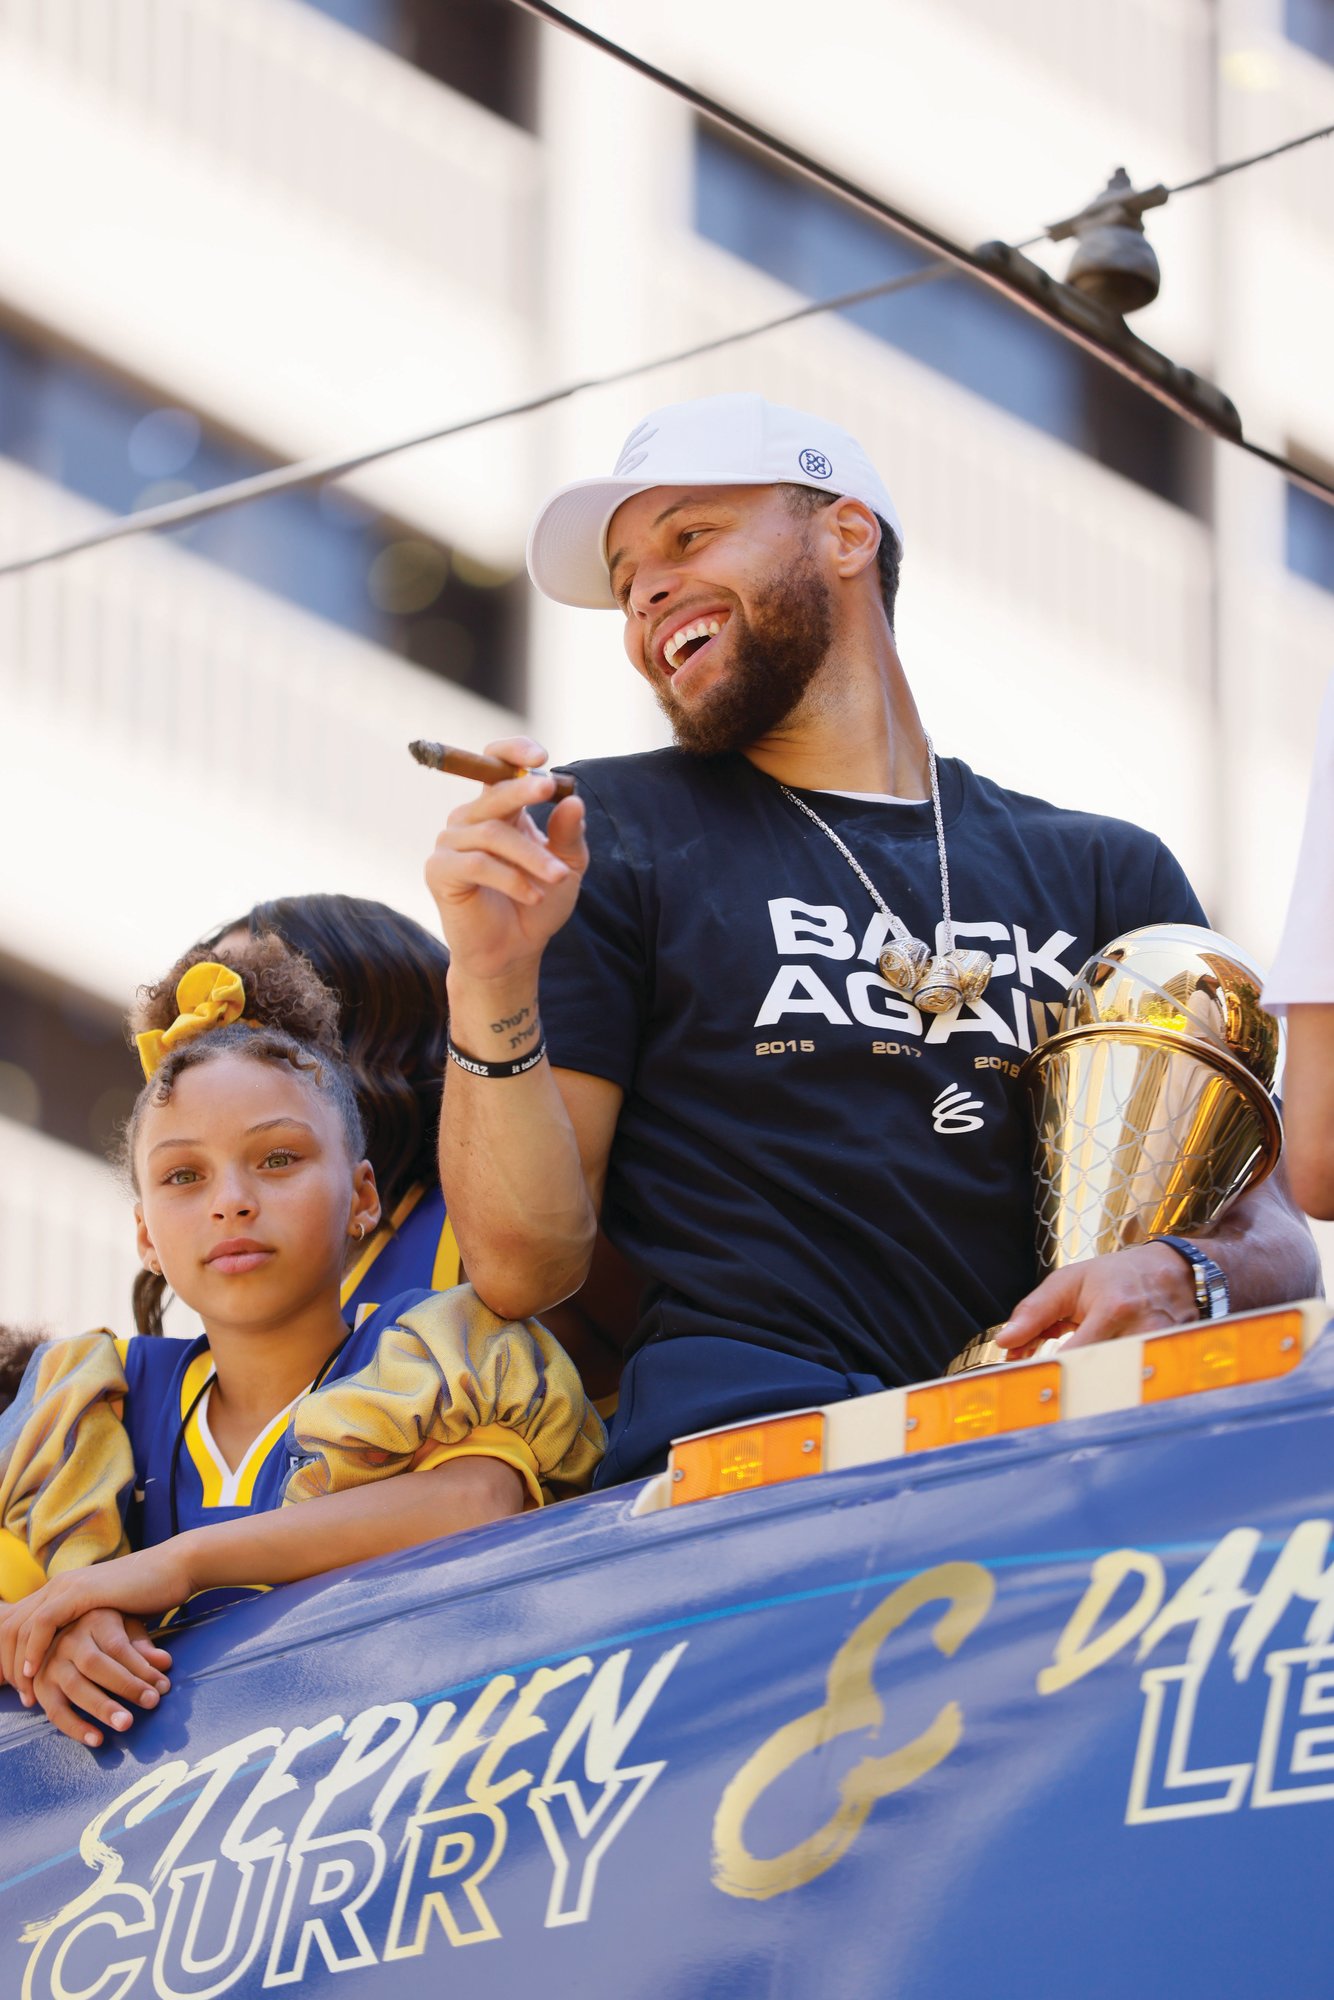 The best photos from the Warriors championship parade in San Francisco